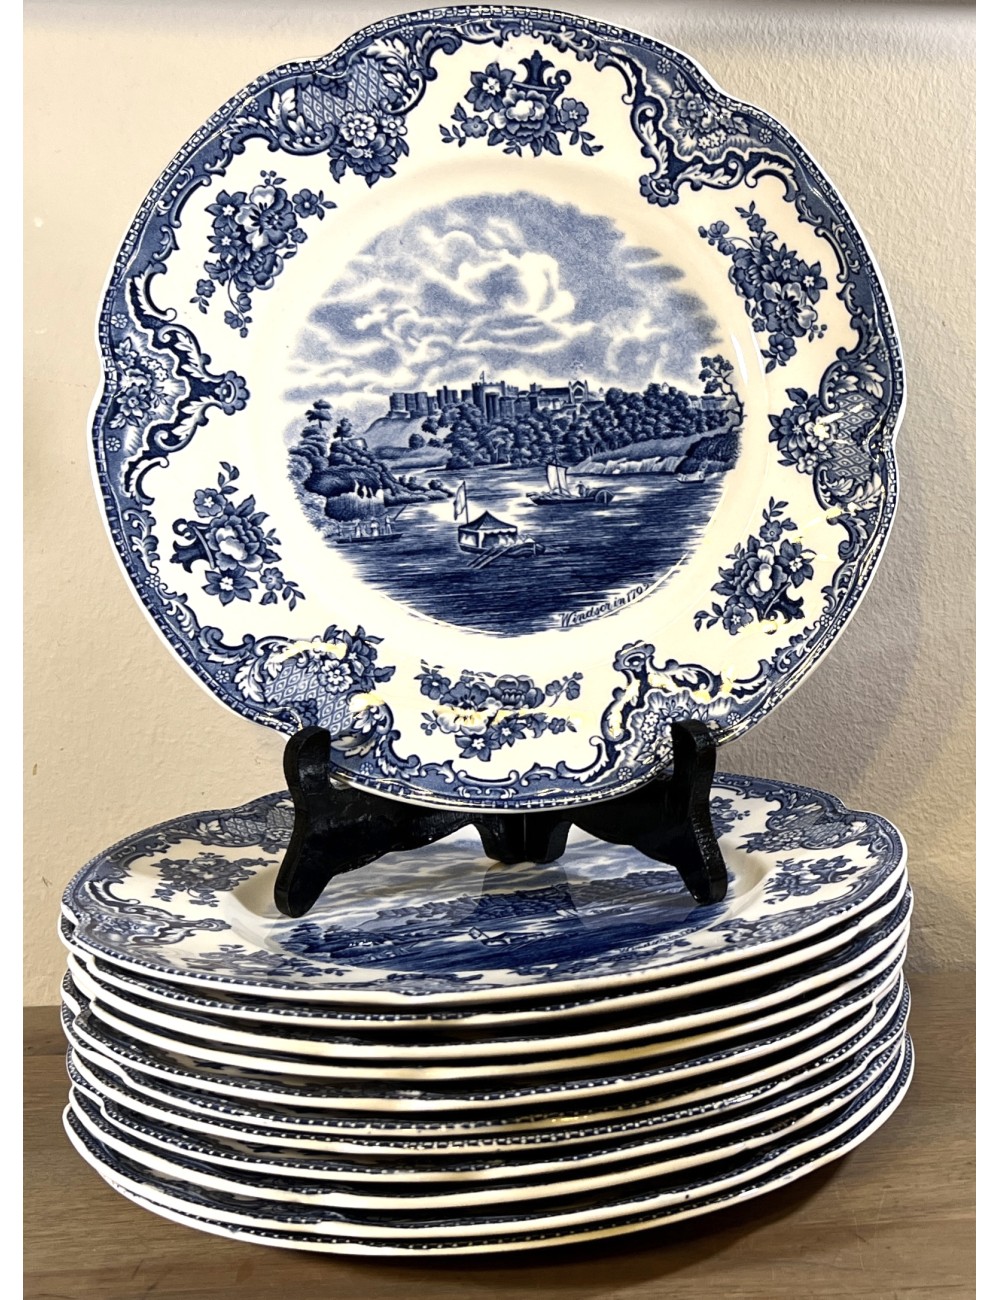 Dinner plate - Johnson Bros England - décor OLD BRITAIN CASTLES executed in blue